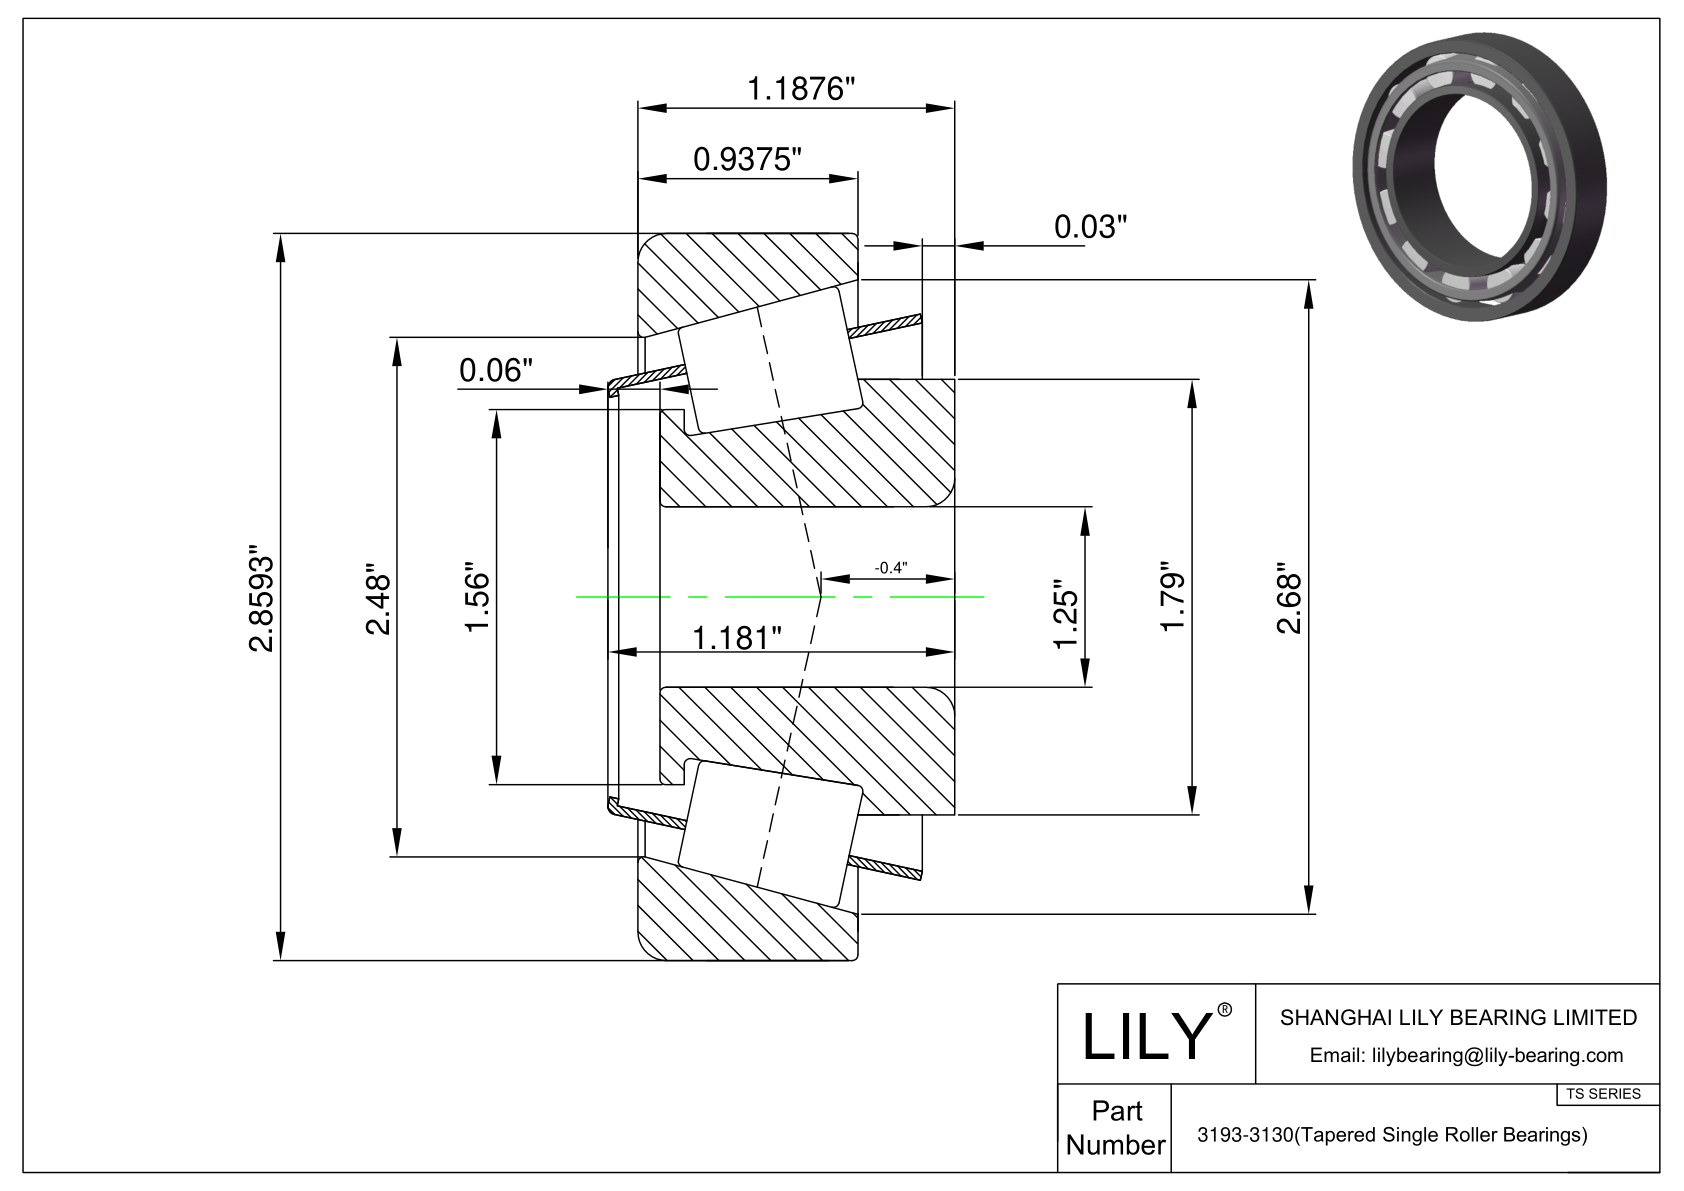 3193-3130 TS (Tapered Single Roller Bearings) (Imperial) cad drawing